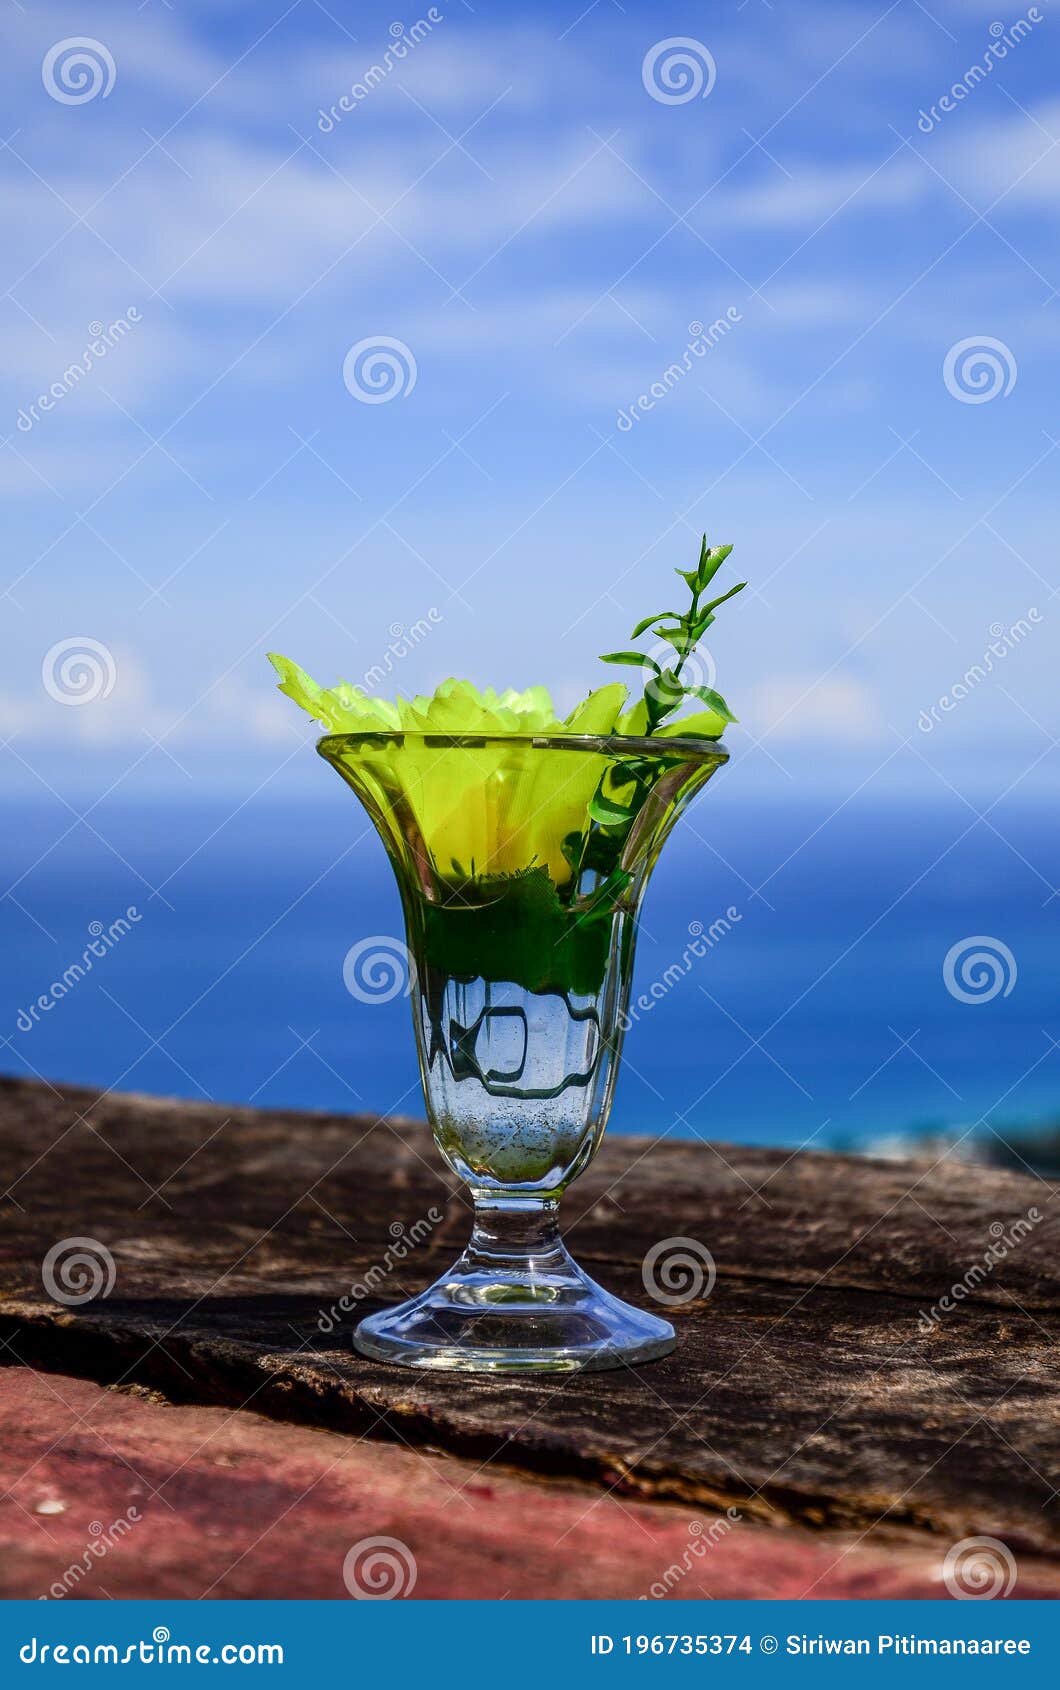 wellcome drink : cold water and yellow flower in clear glass on blue sky background